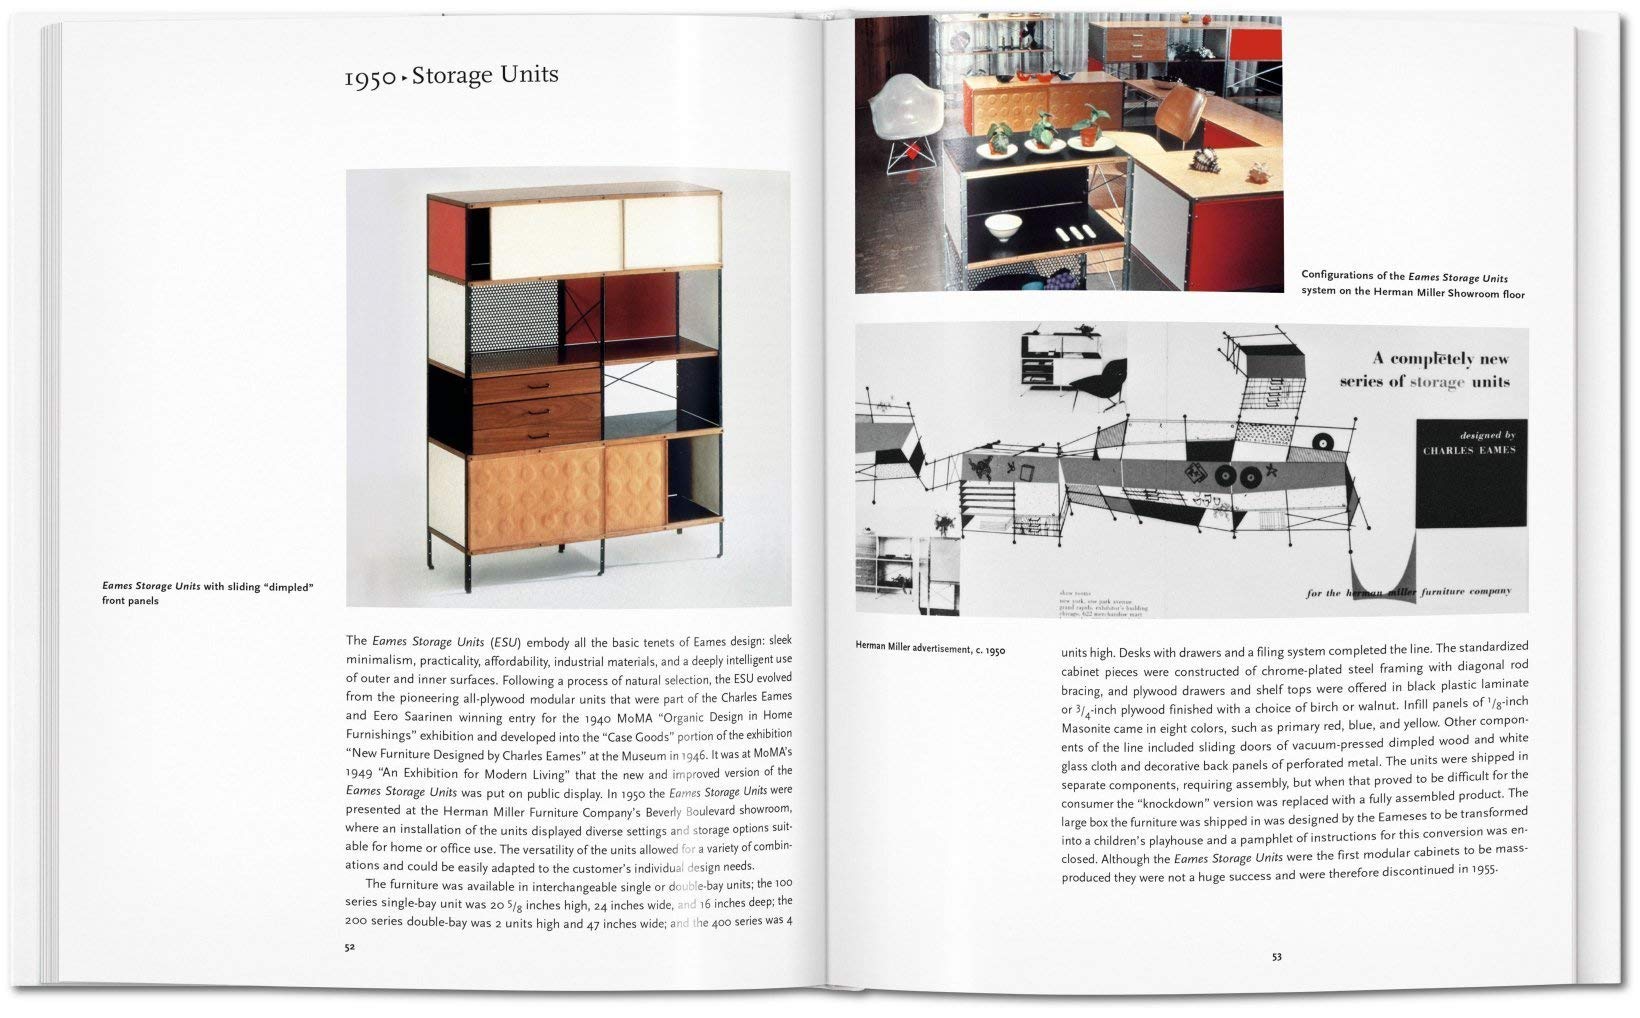 Charles & Ray Eames: 1907-1978, 1912-1988: Pioneers of Mid-century Modernism